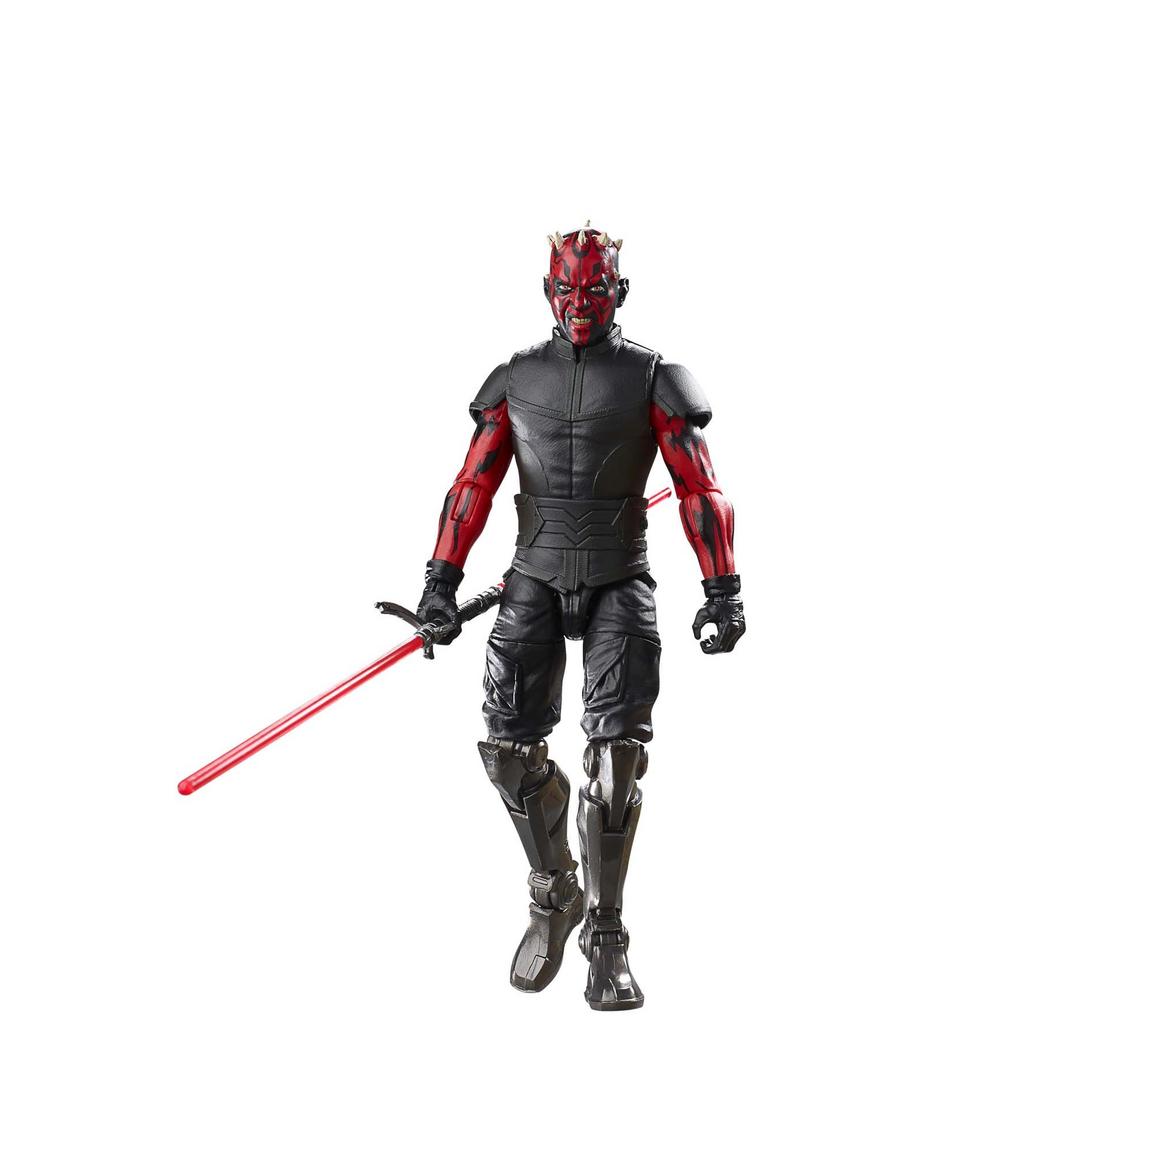 Star Wars: The Black Series Gaming Greats Star Wars: Battlefront II Darth Maul 6-in Action Figure GameStop Exclusive